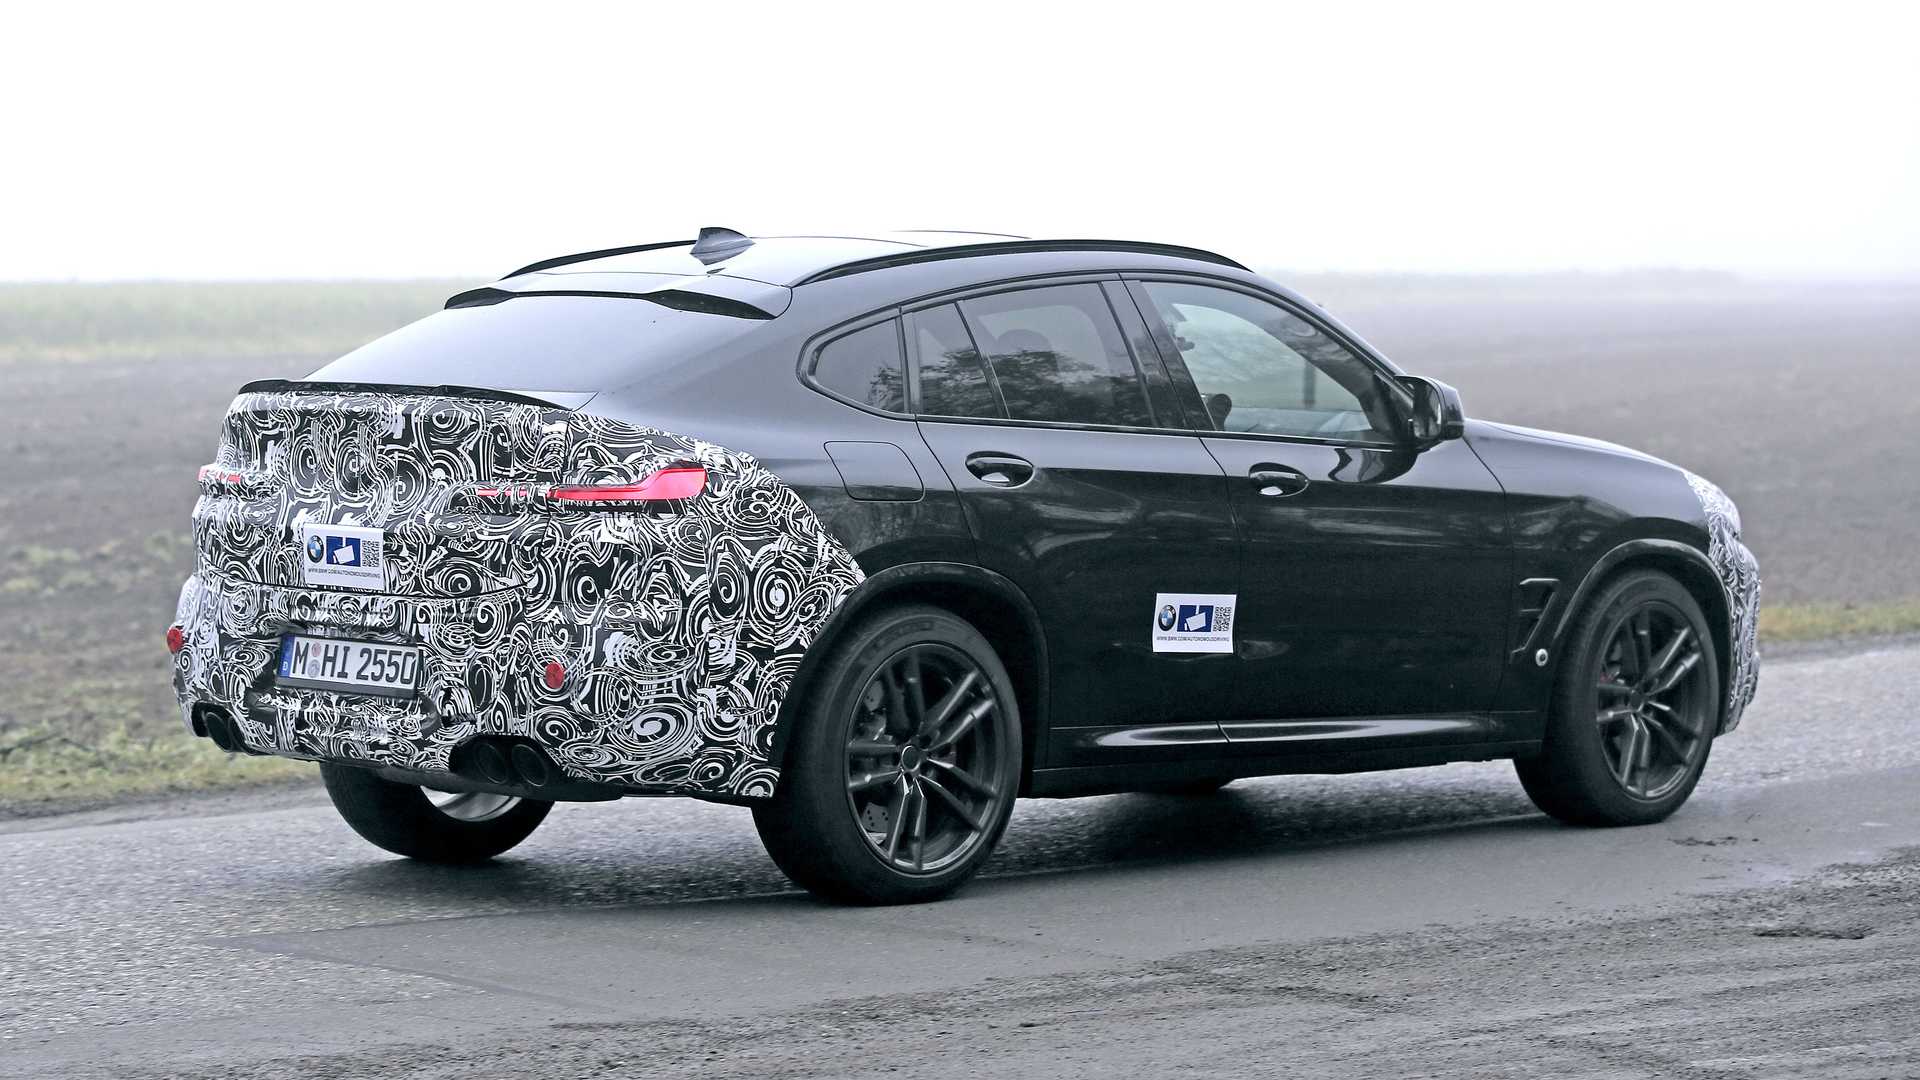 face-lifted-bmw-x4-spied-during-testing (6).jpg